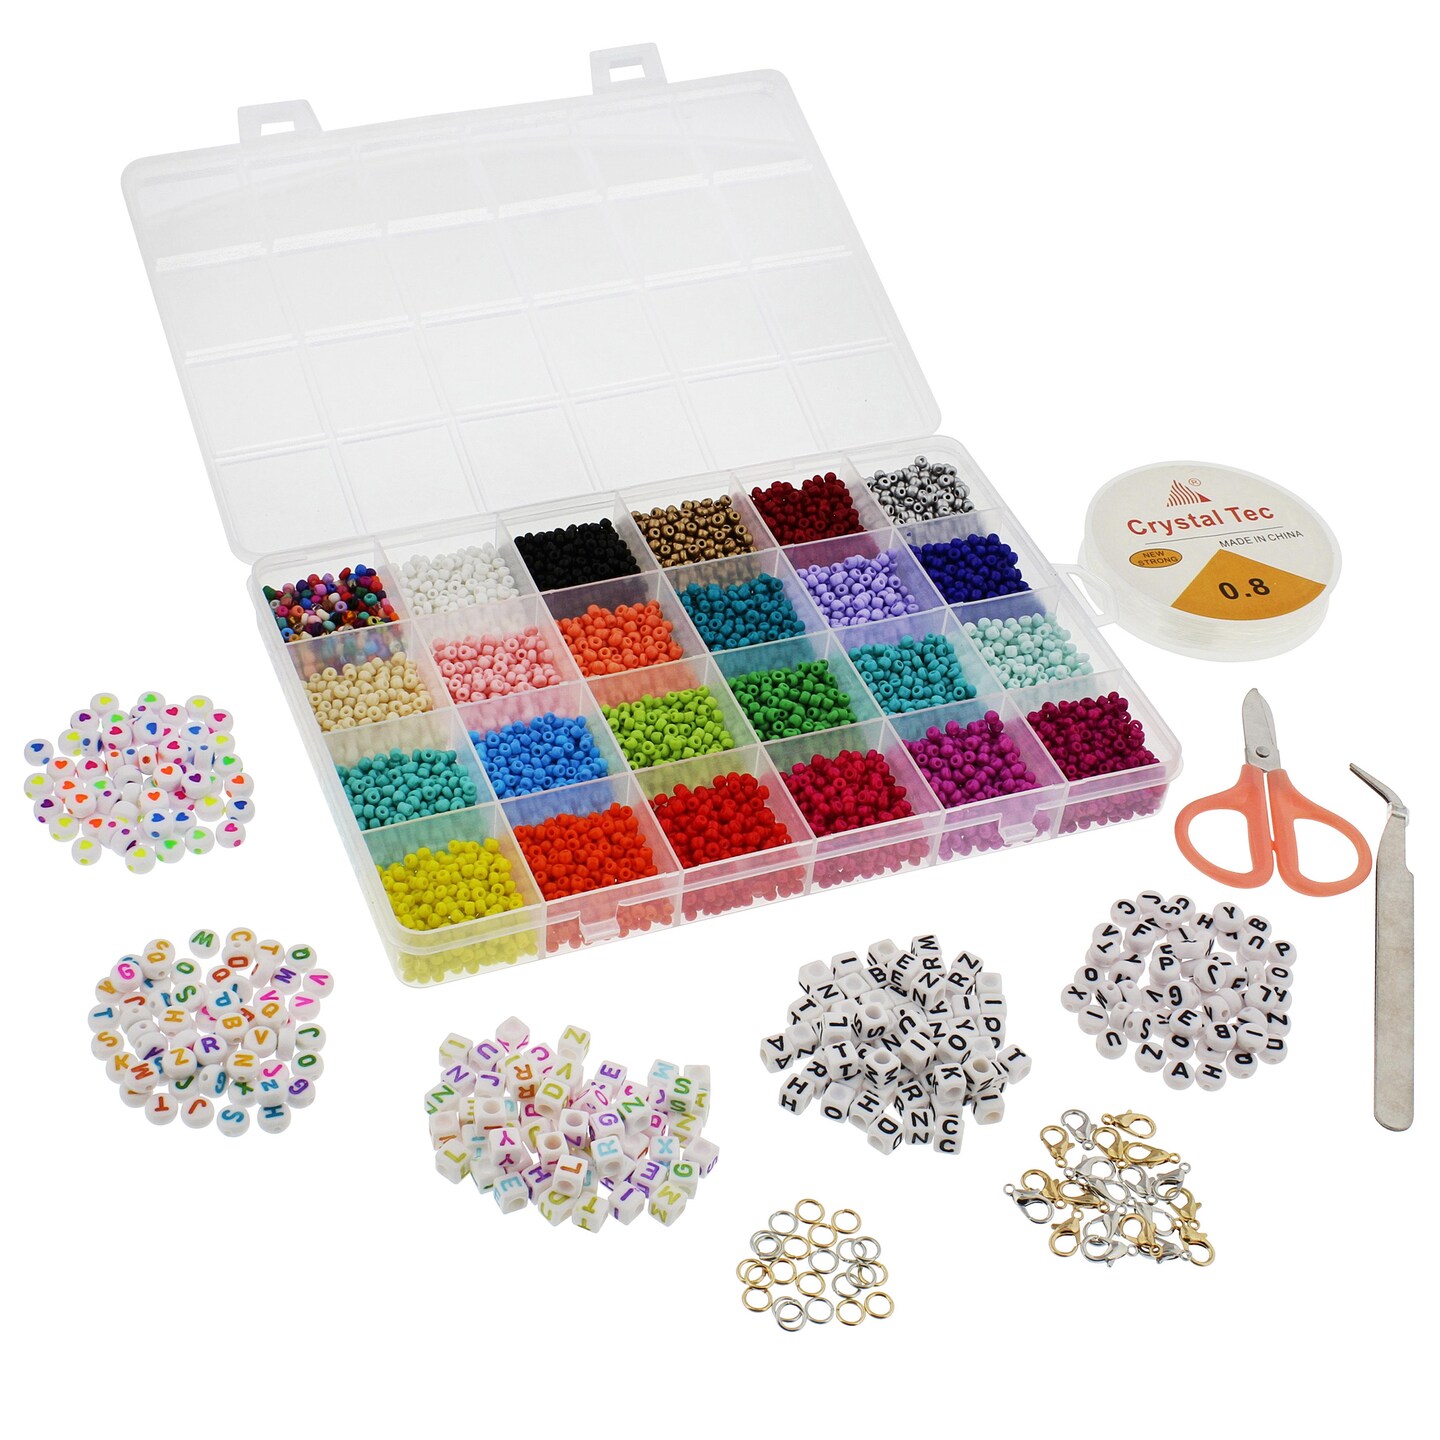 CraftyBook 7500pc Beads Bracelet Making Kits with Small Glass and Letter Beads